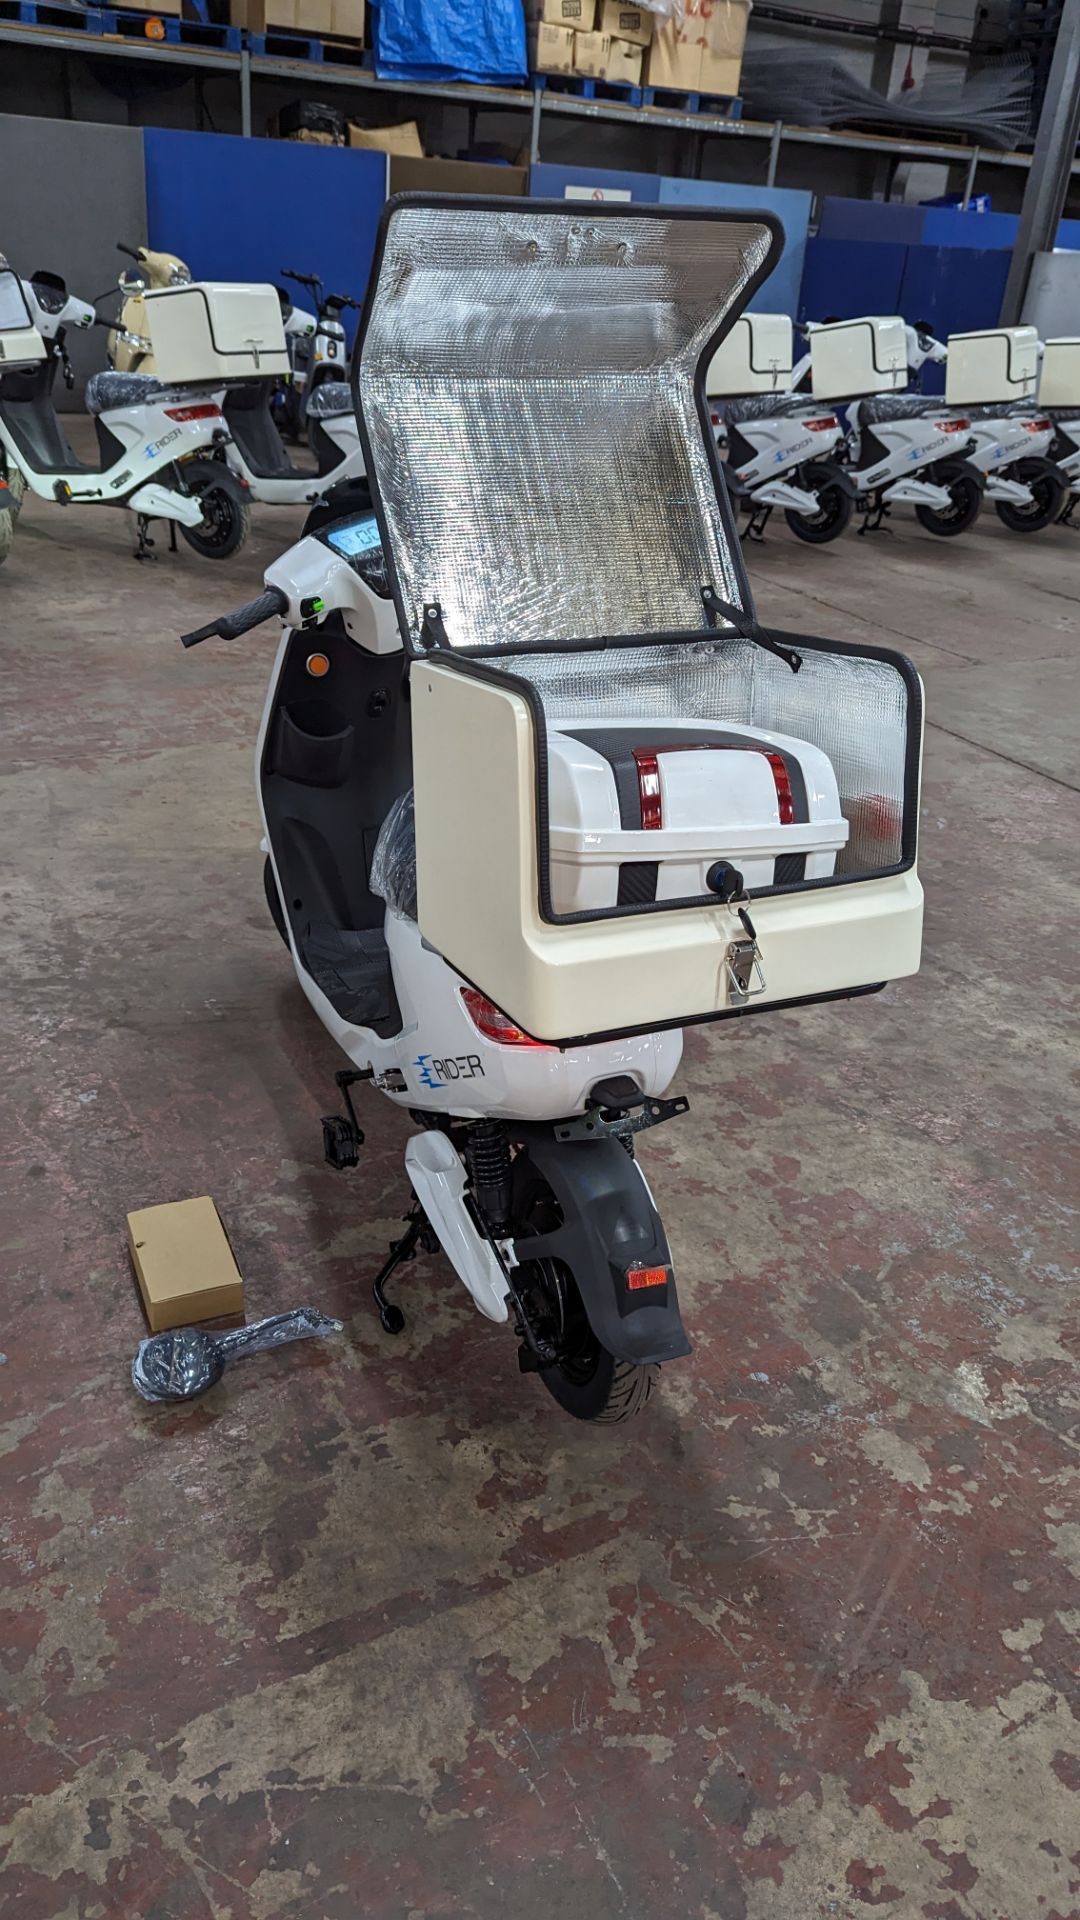 Model 18 Electric Bike: Zero (0) recorded miles, white body with black detailing, insulated box moun - Image 12 of 13